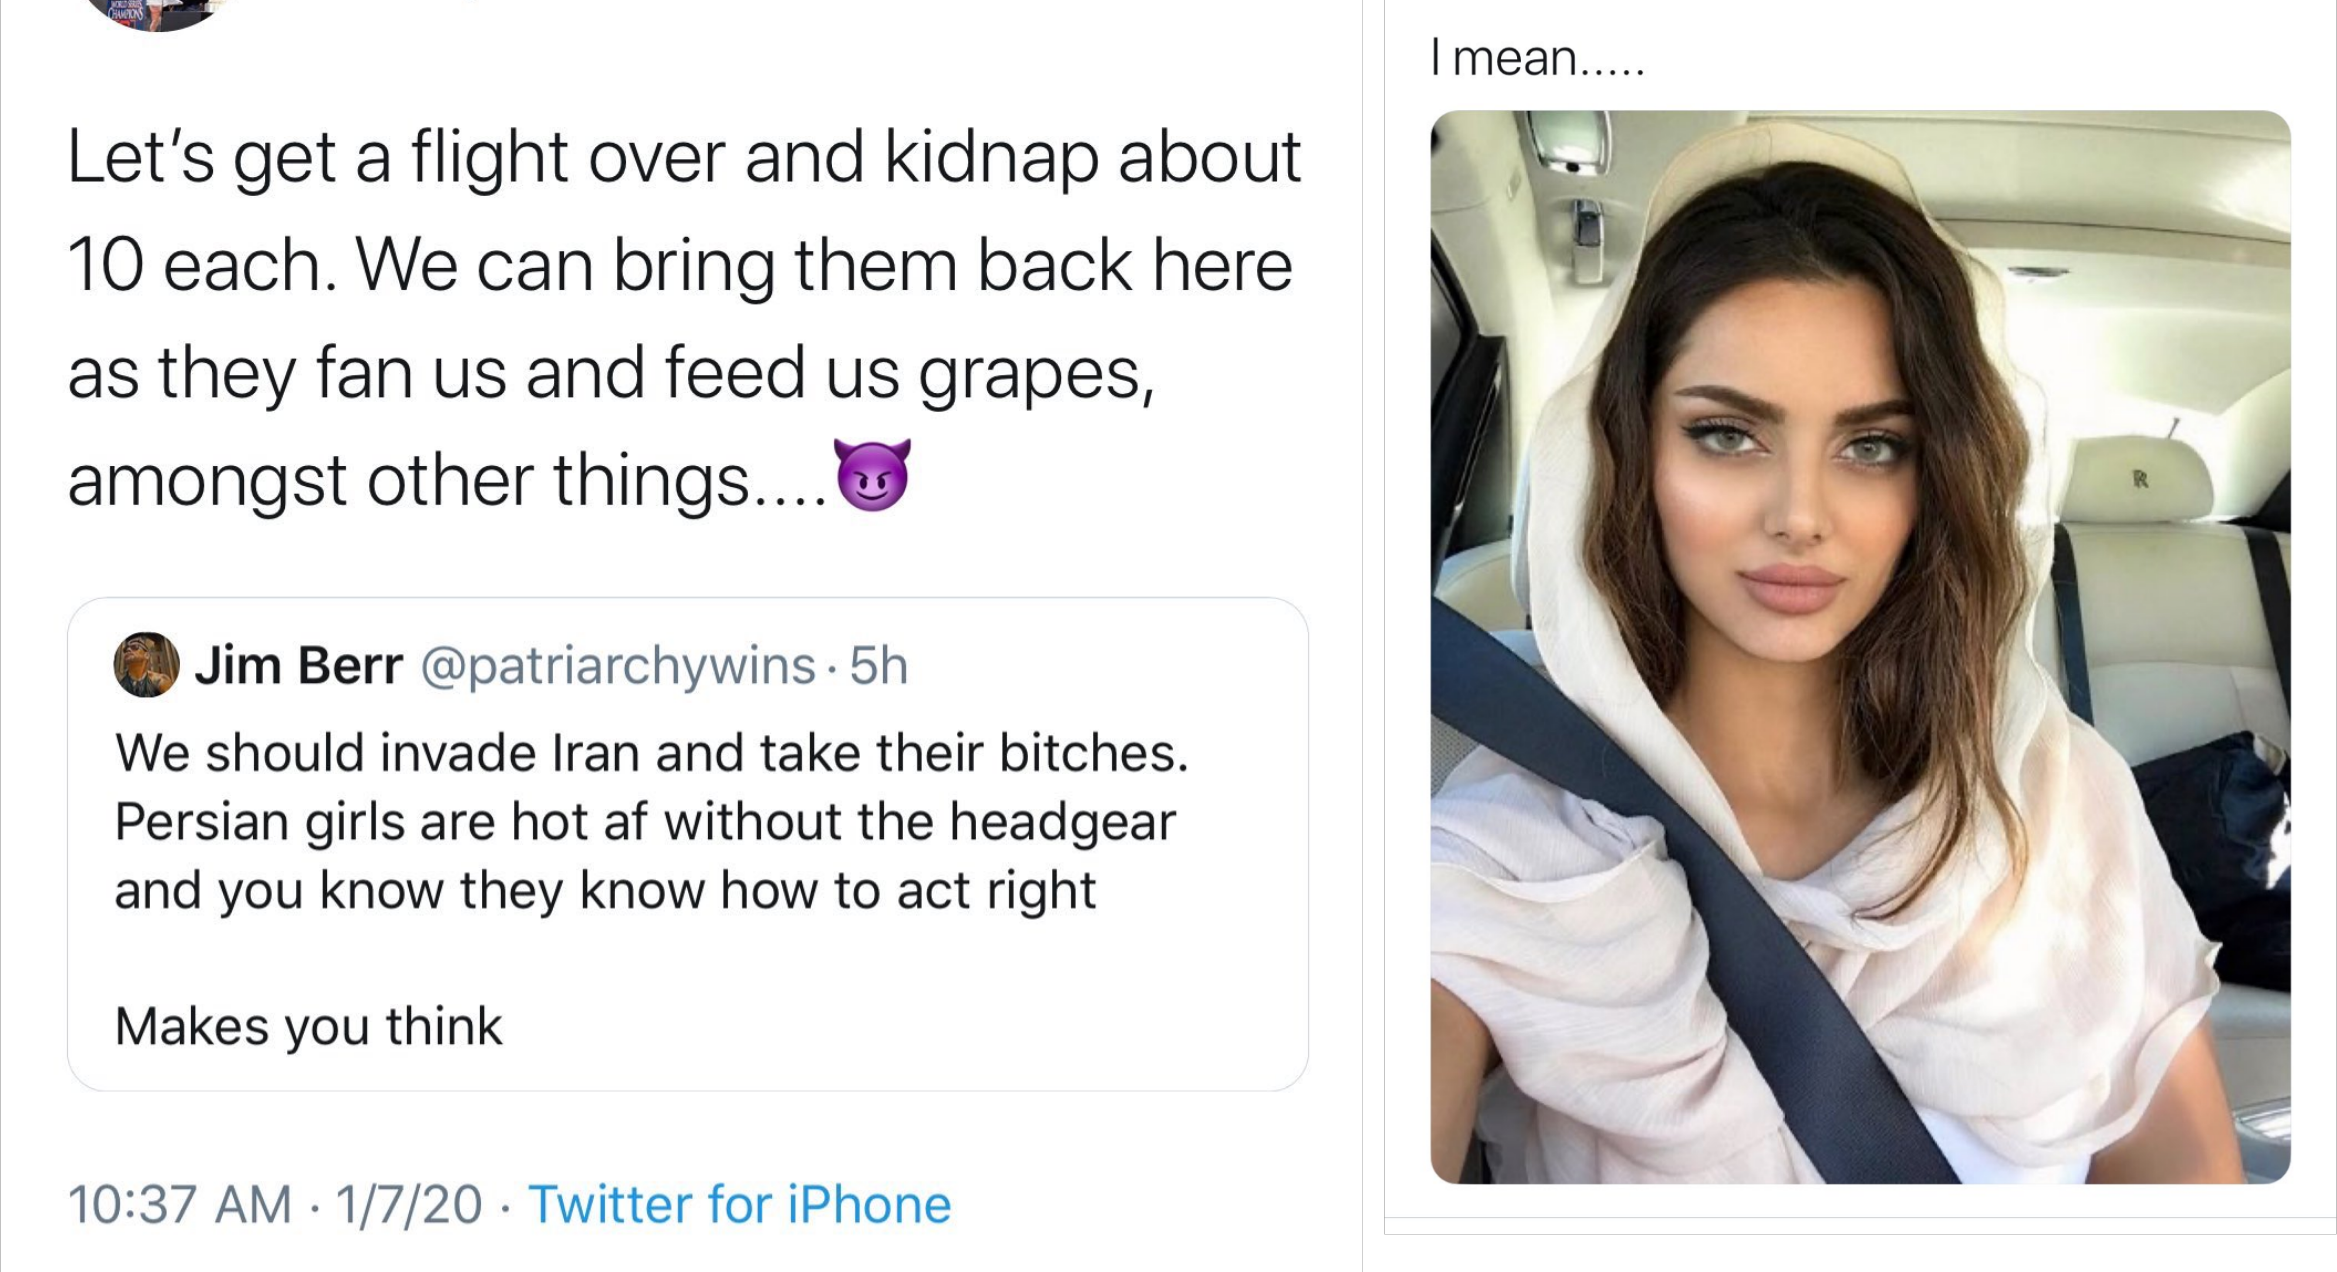 media - I mean.... Let's get a flight over and kidnap about 10 each. We can bring them back here as they fan us and feed us grapes, amongst other things.... Jim Berr . 5h We should invade Iran and take their bitches. Persian girls are hot af without the h